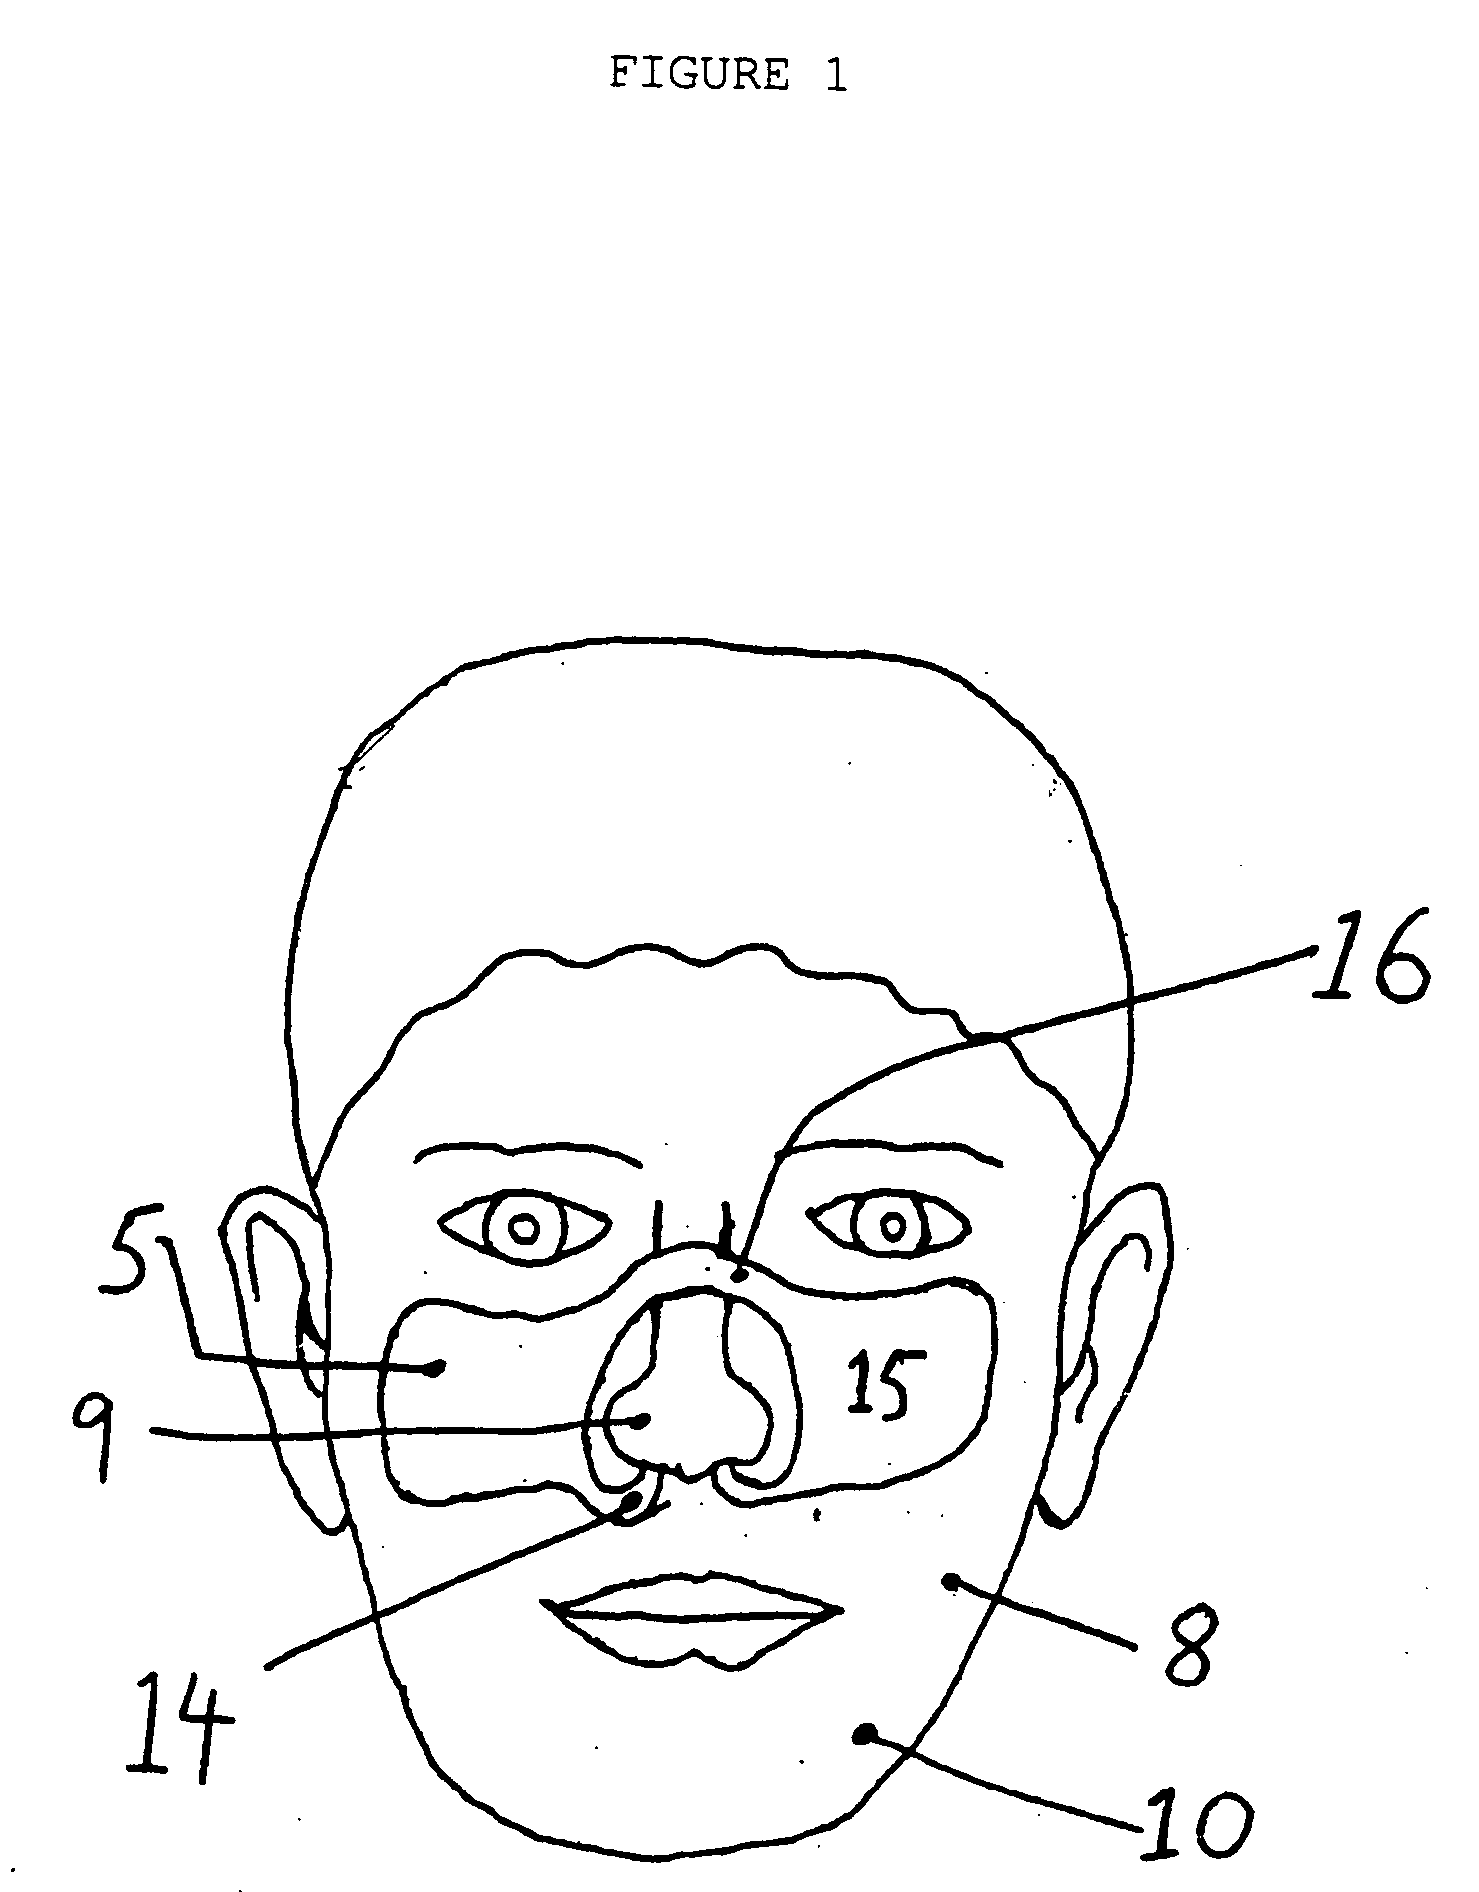 Continuous nasal irrigation device